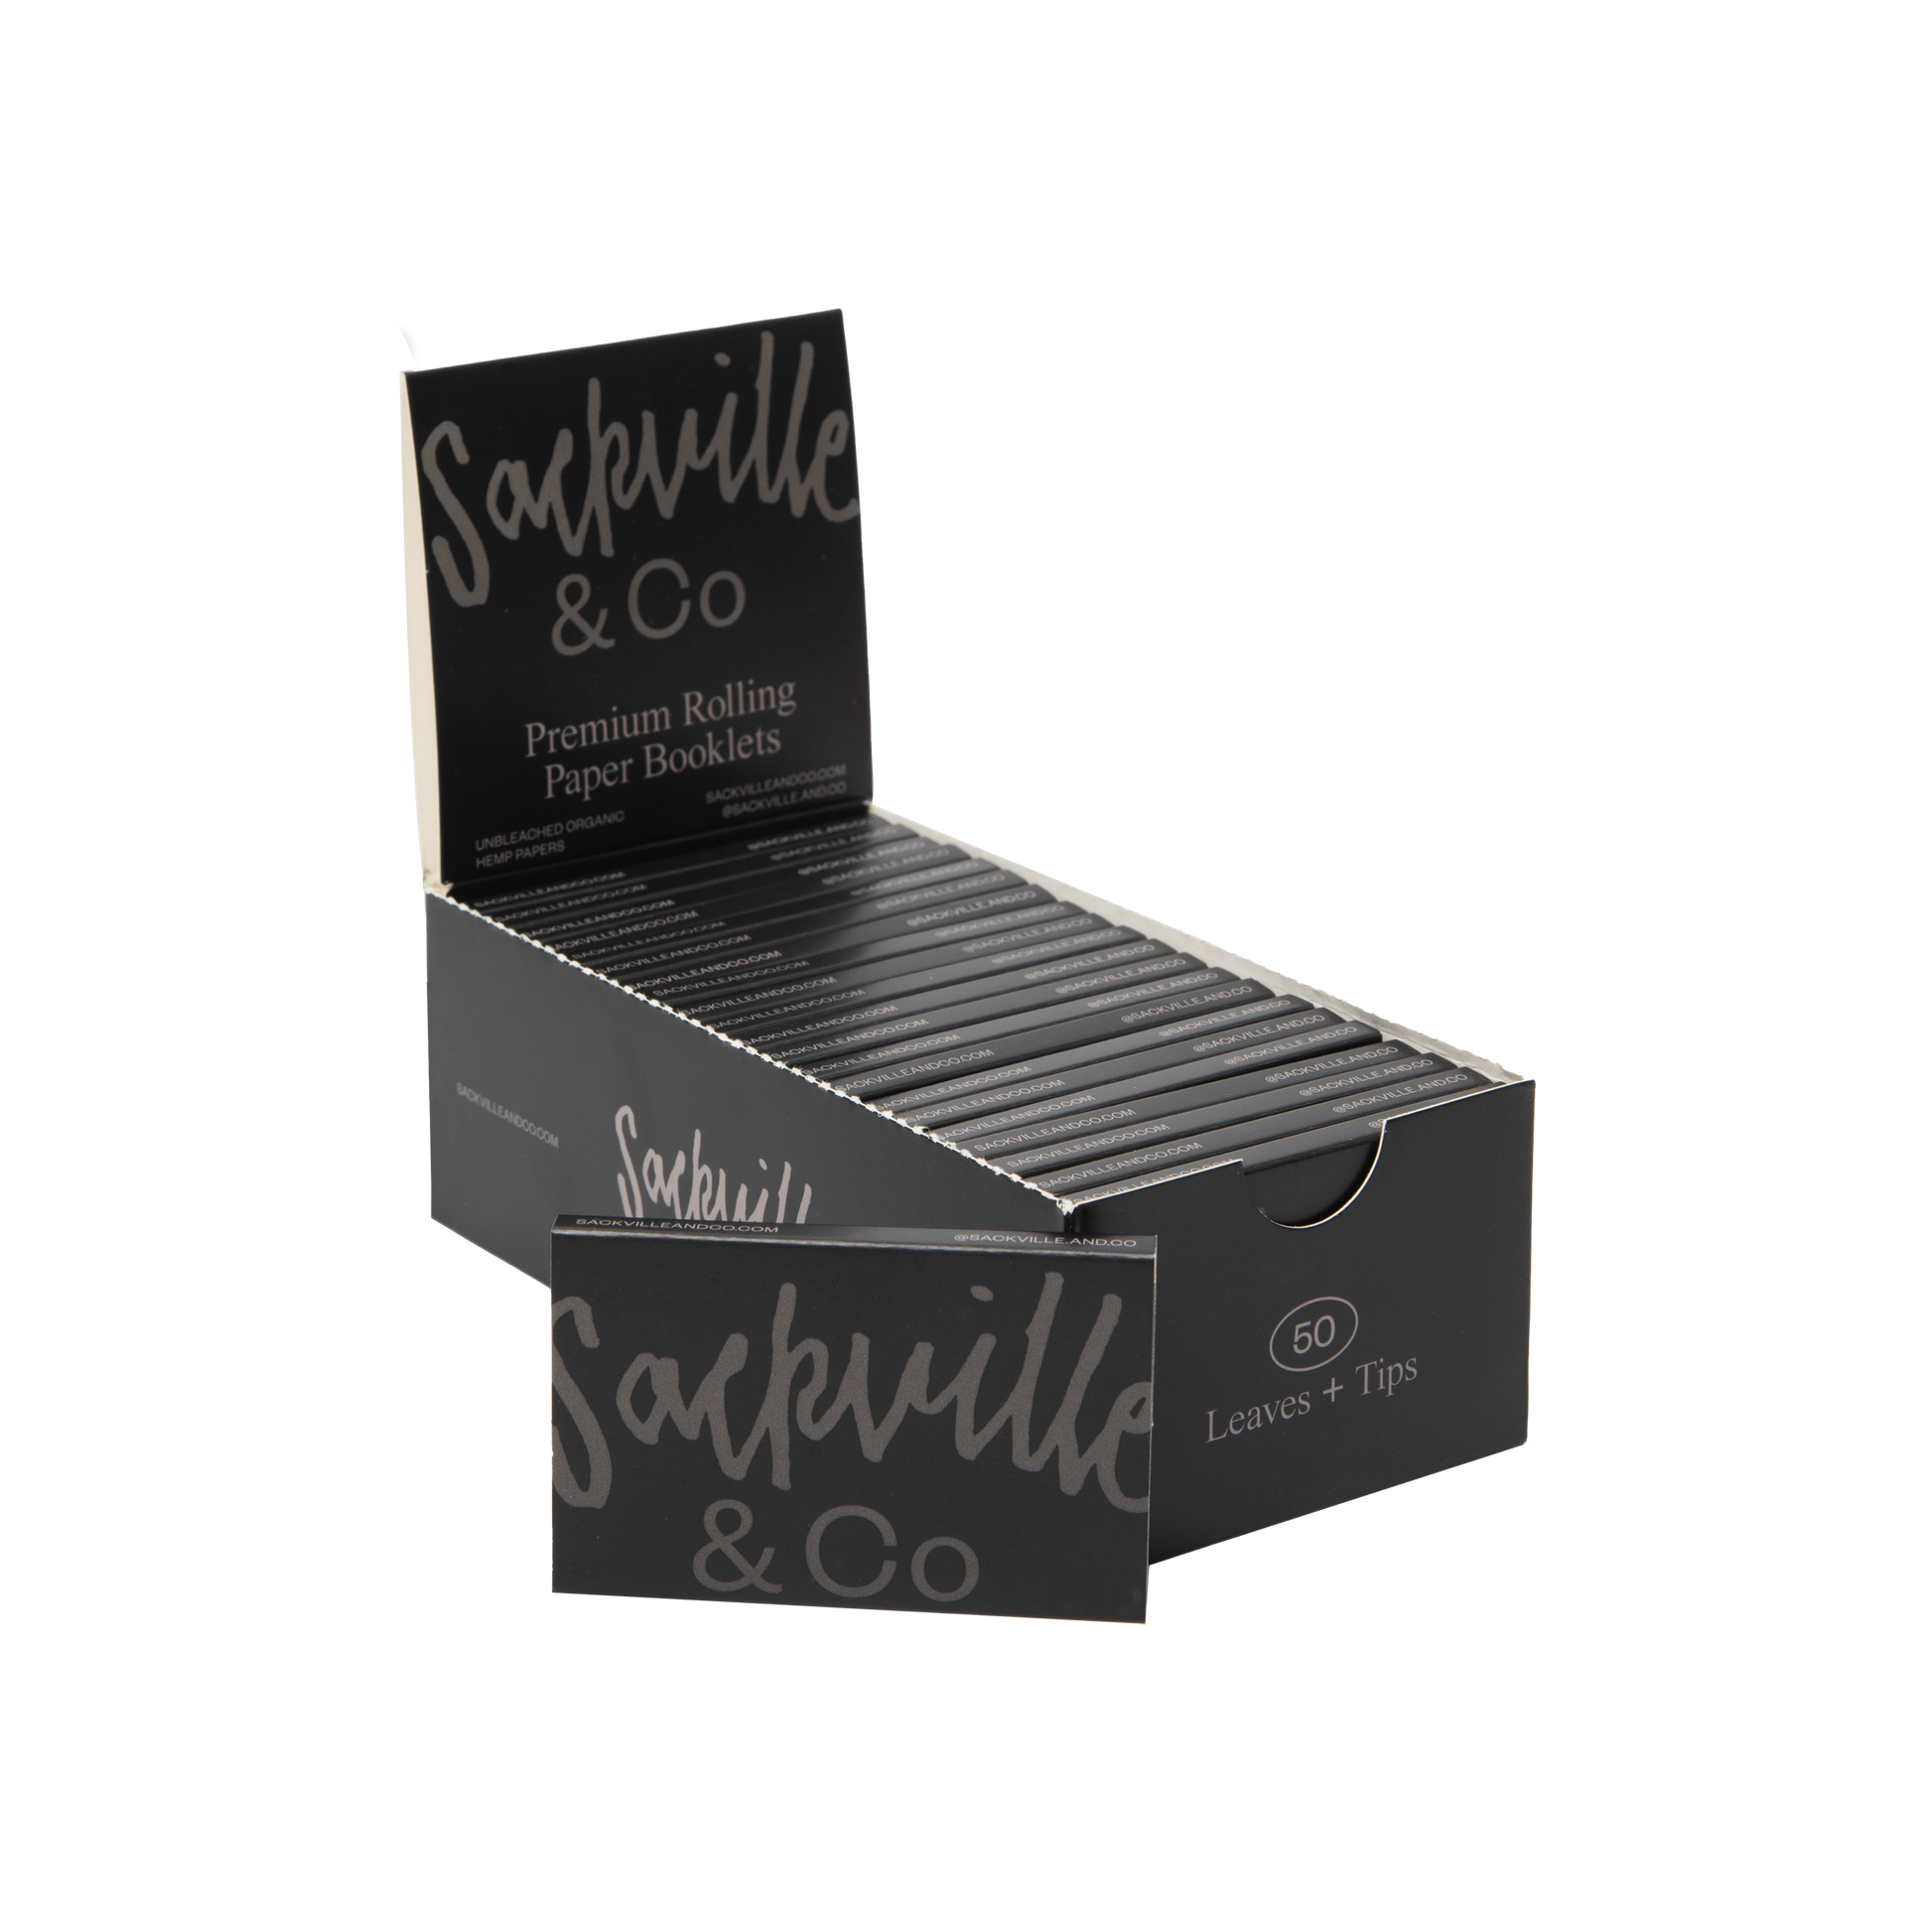 Black Rolling Papers - 22 Case - Sackville & Co.